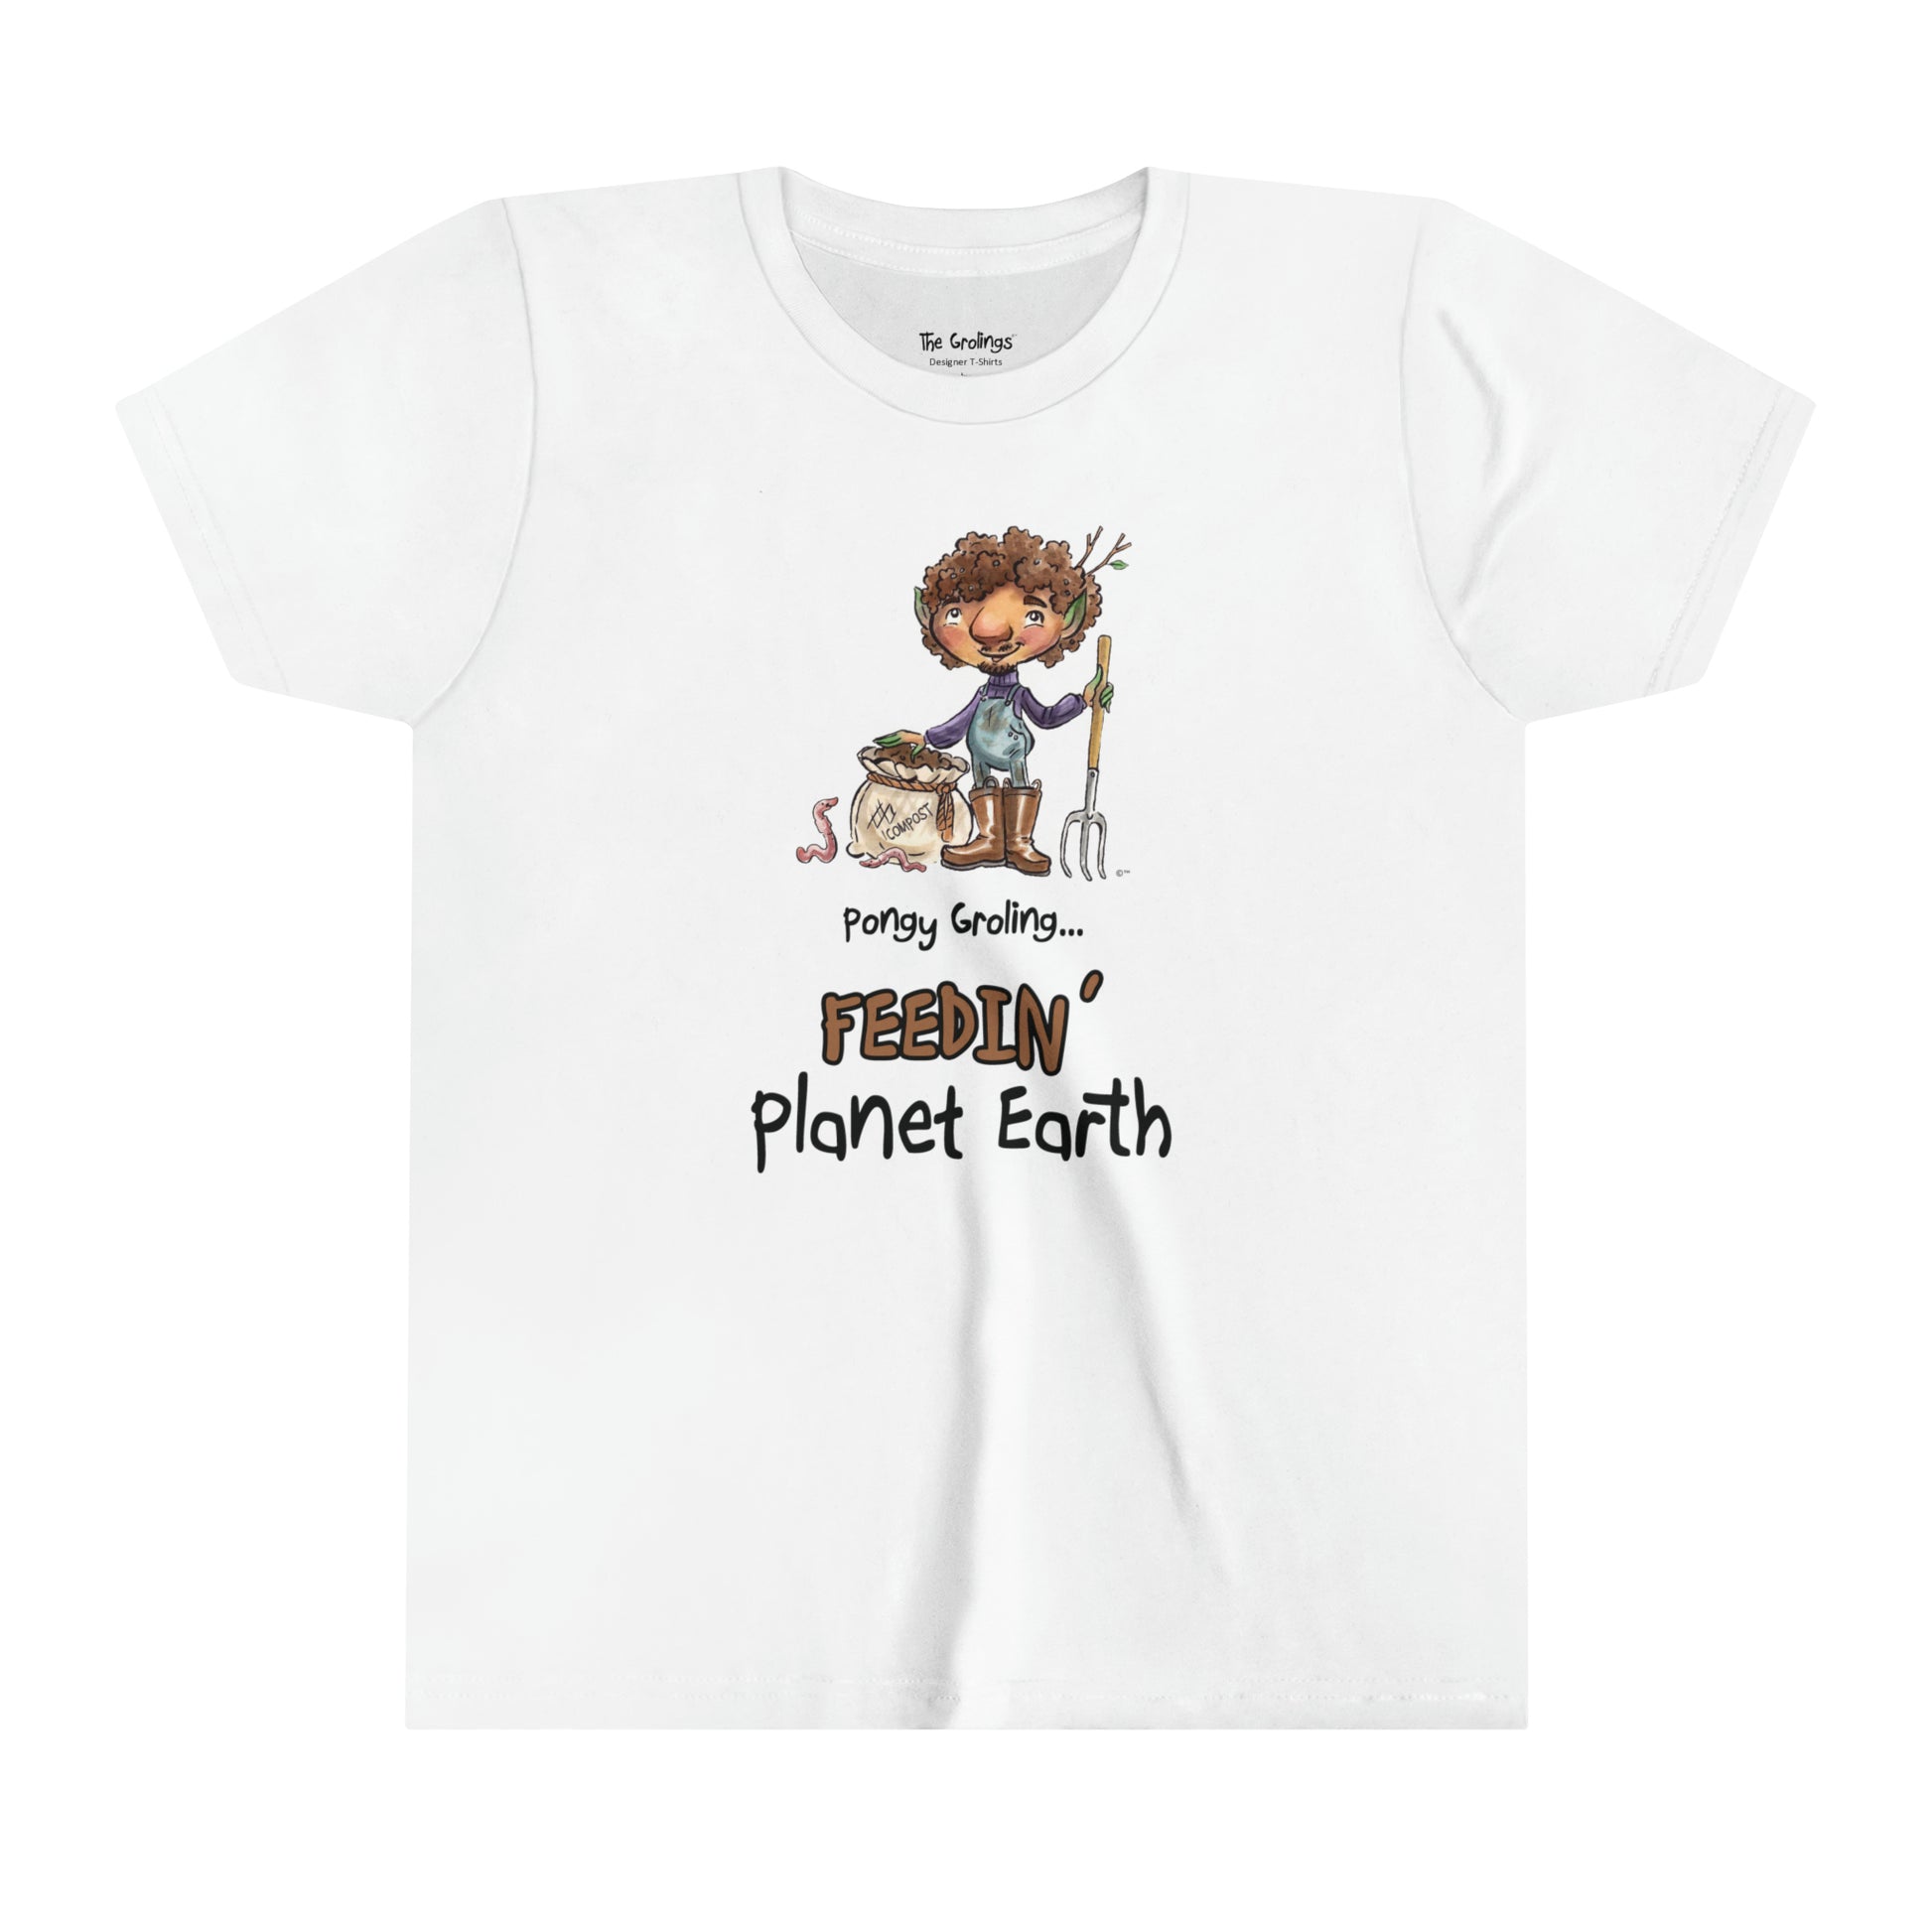 A white official USA Grolings kids' t-shirt, featuring the phrase 'Pongy Groling... Feedin’ Planet Earth.' The t-shirt showcases Pongy Groling, a character from ‘Matisse and the Topsy-Turvy Farm,’ standing beside a sack of compost. Pongy Groling is holding a garden fork, and a friendly worm is watching. The scene highlights the importance of nourishing the Earth through composting and fostering a harmonious relationship with nature. The 